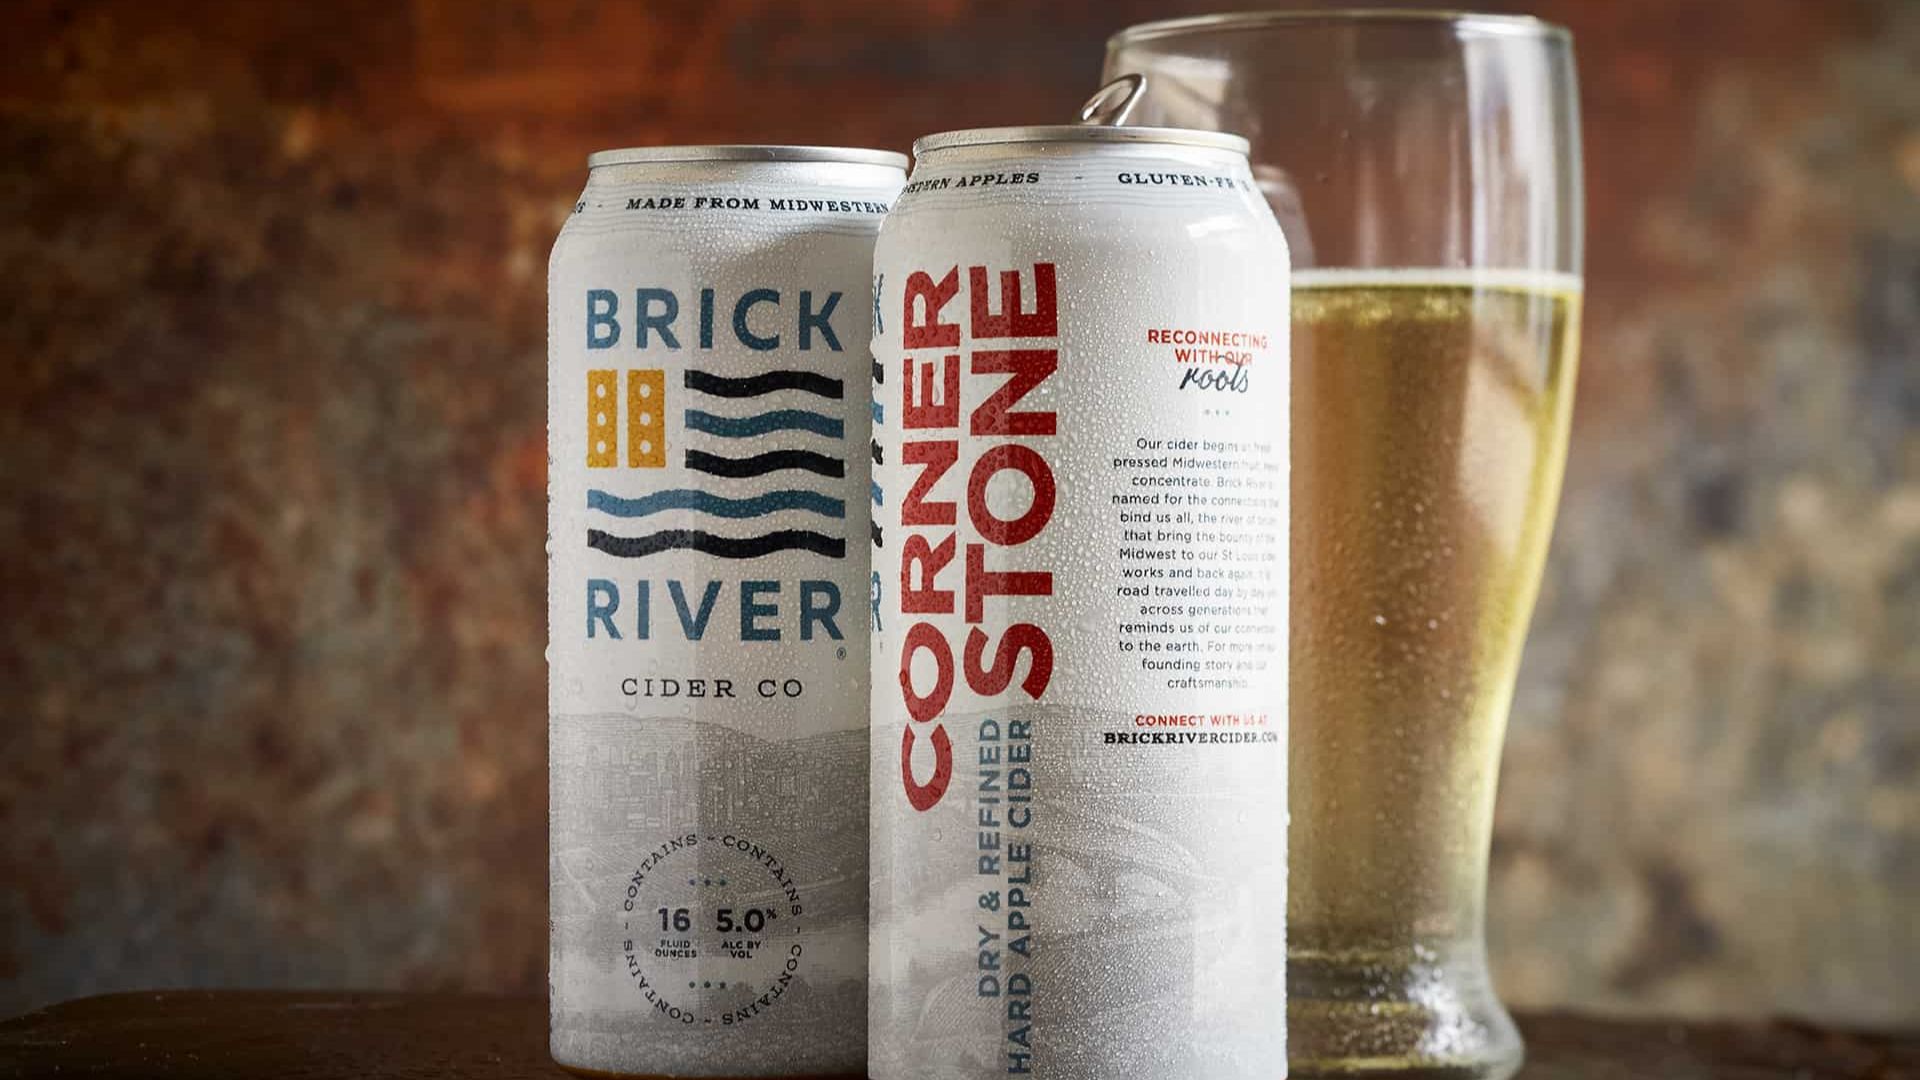 The ciders from Brick River Cider Co. are made from fresh-pressed Midwestern fruit.